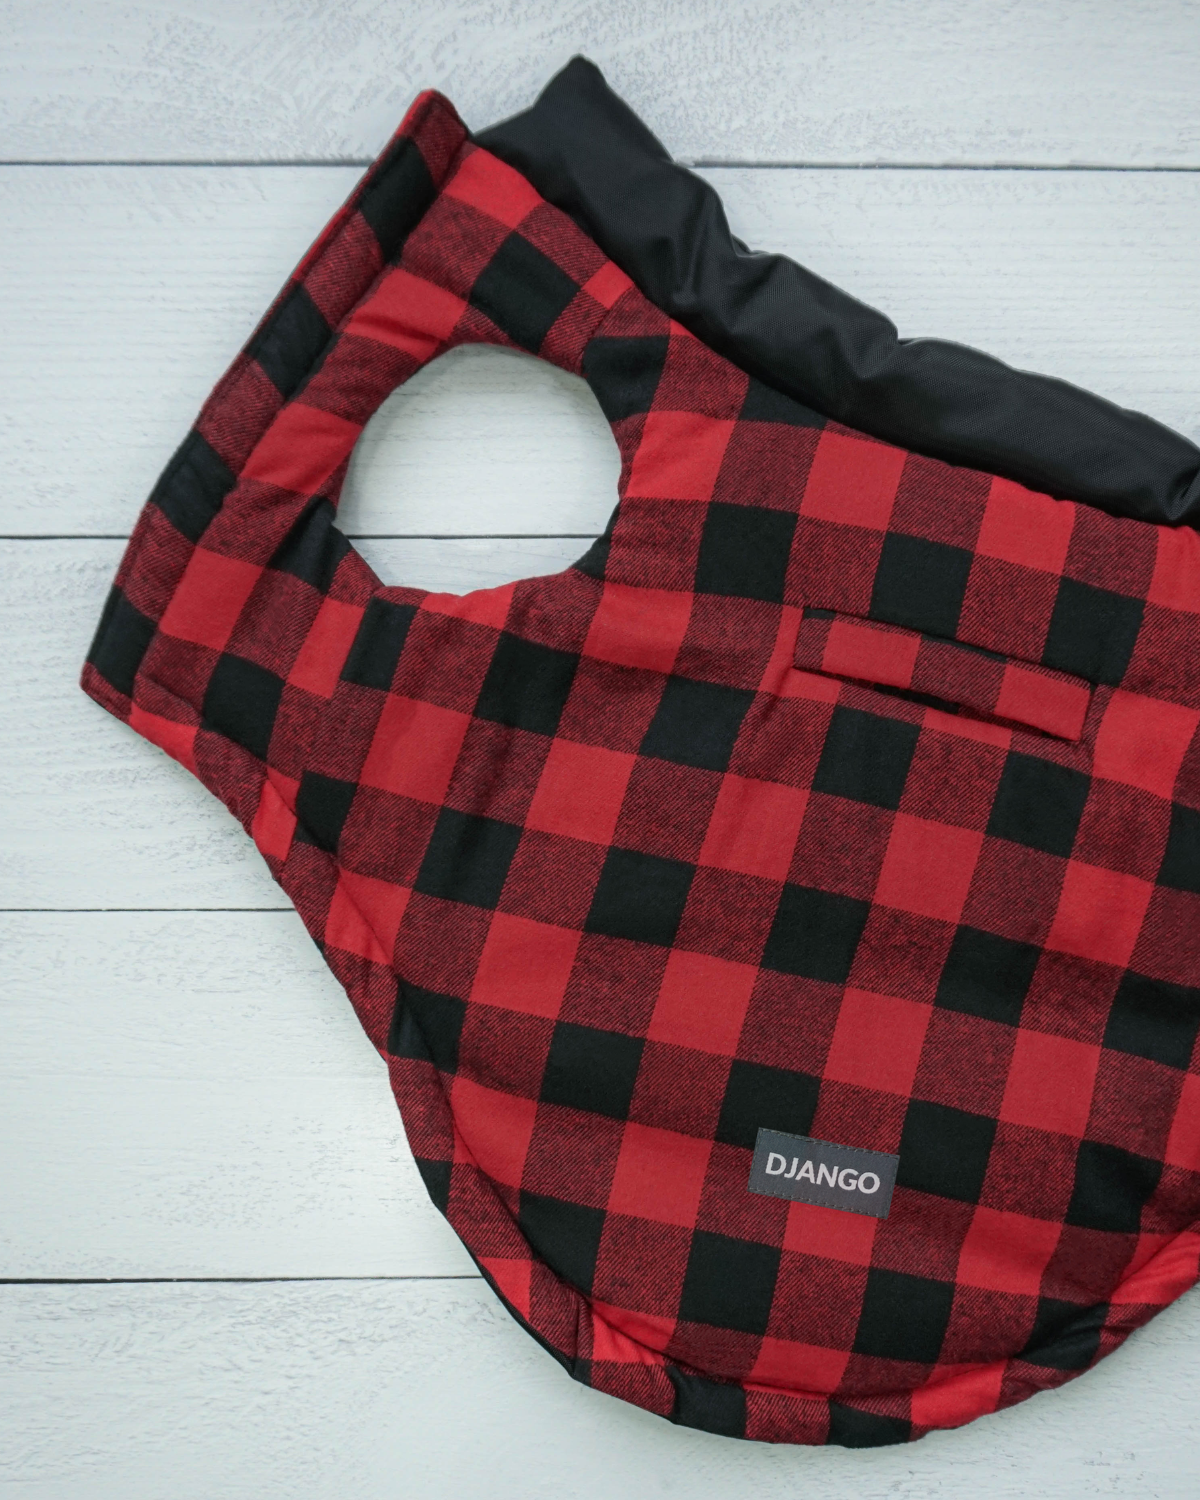 DJANGO's Reversible Puffer features a super cozy red and black checkered 'buffalo plaid' interior lining that can be worn facing outwards. Dog and their hoomans love the oversized armholes, adjustable hem, and spacious and easy-access leash portal - djangobrand.com